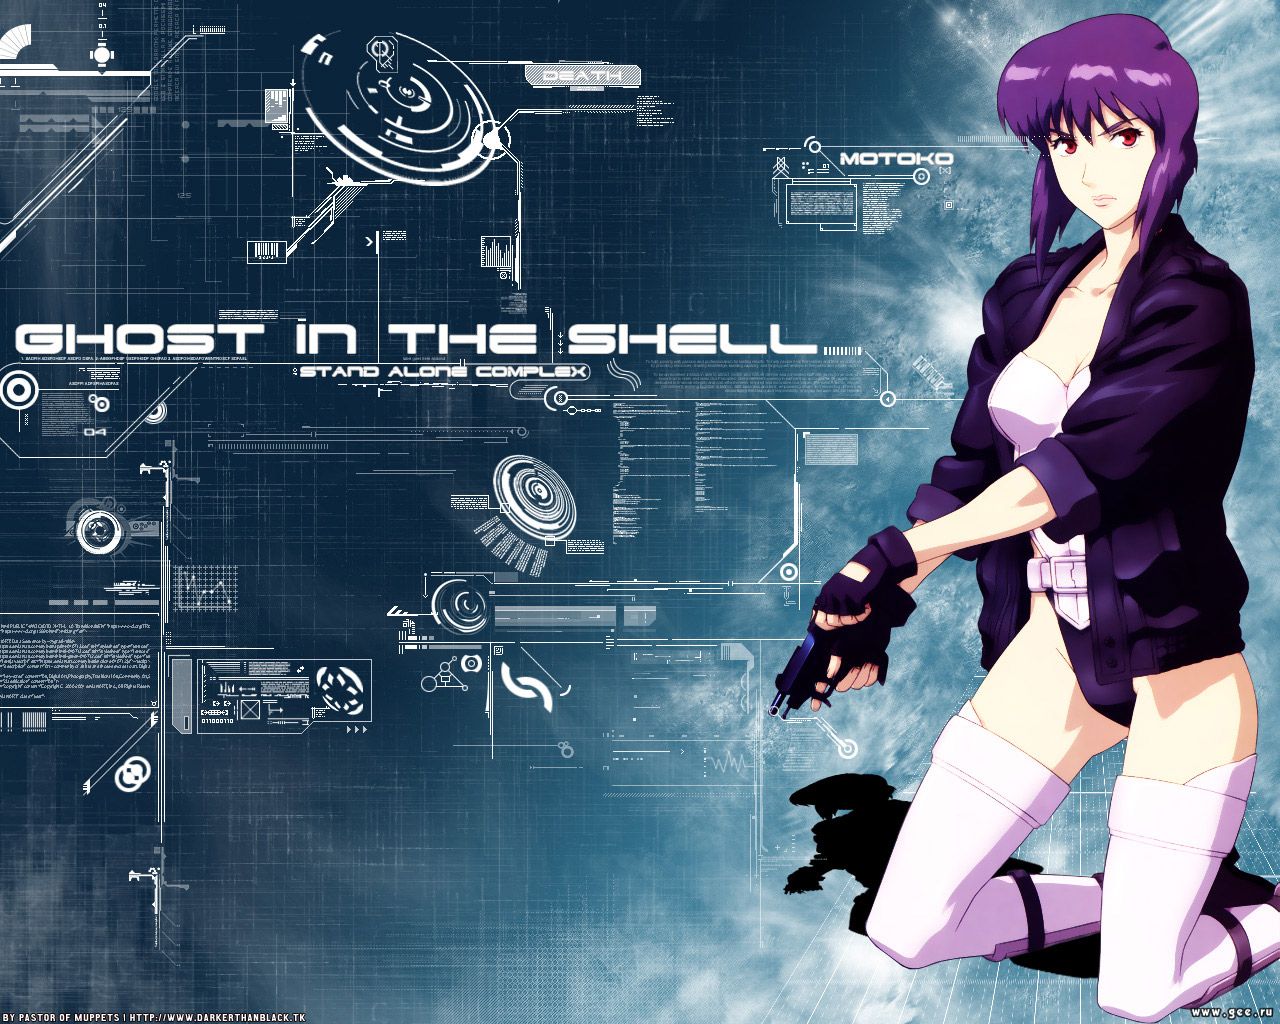 Wallpaper ghost in the shell Manga